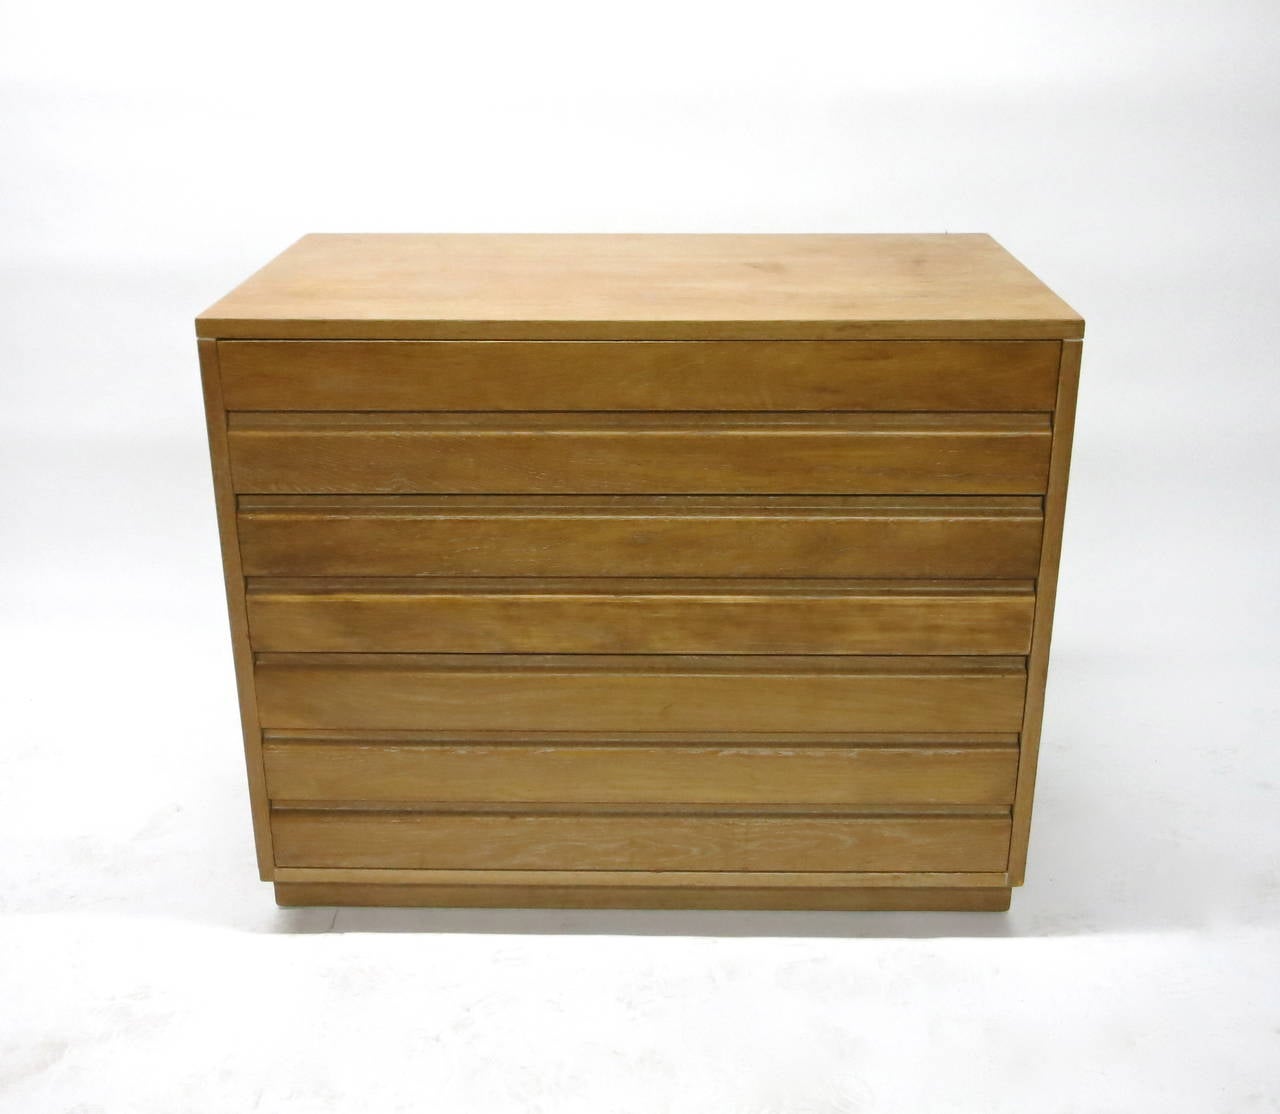 Cabinet has three drawers with the bottom being largest.The top drawers have dividers and the original Grand Rapids logo. Was originally finished in grey oak and recently changed to limed oak.